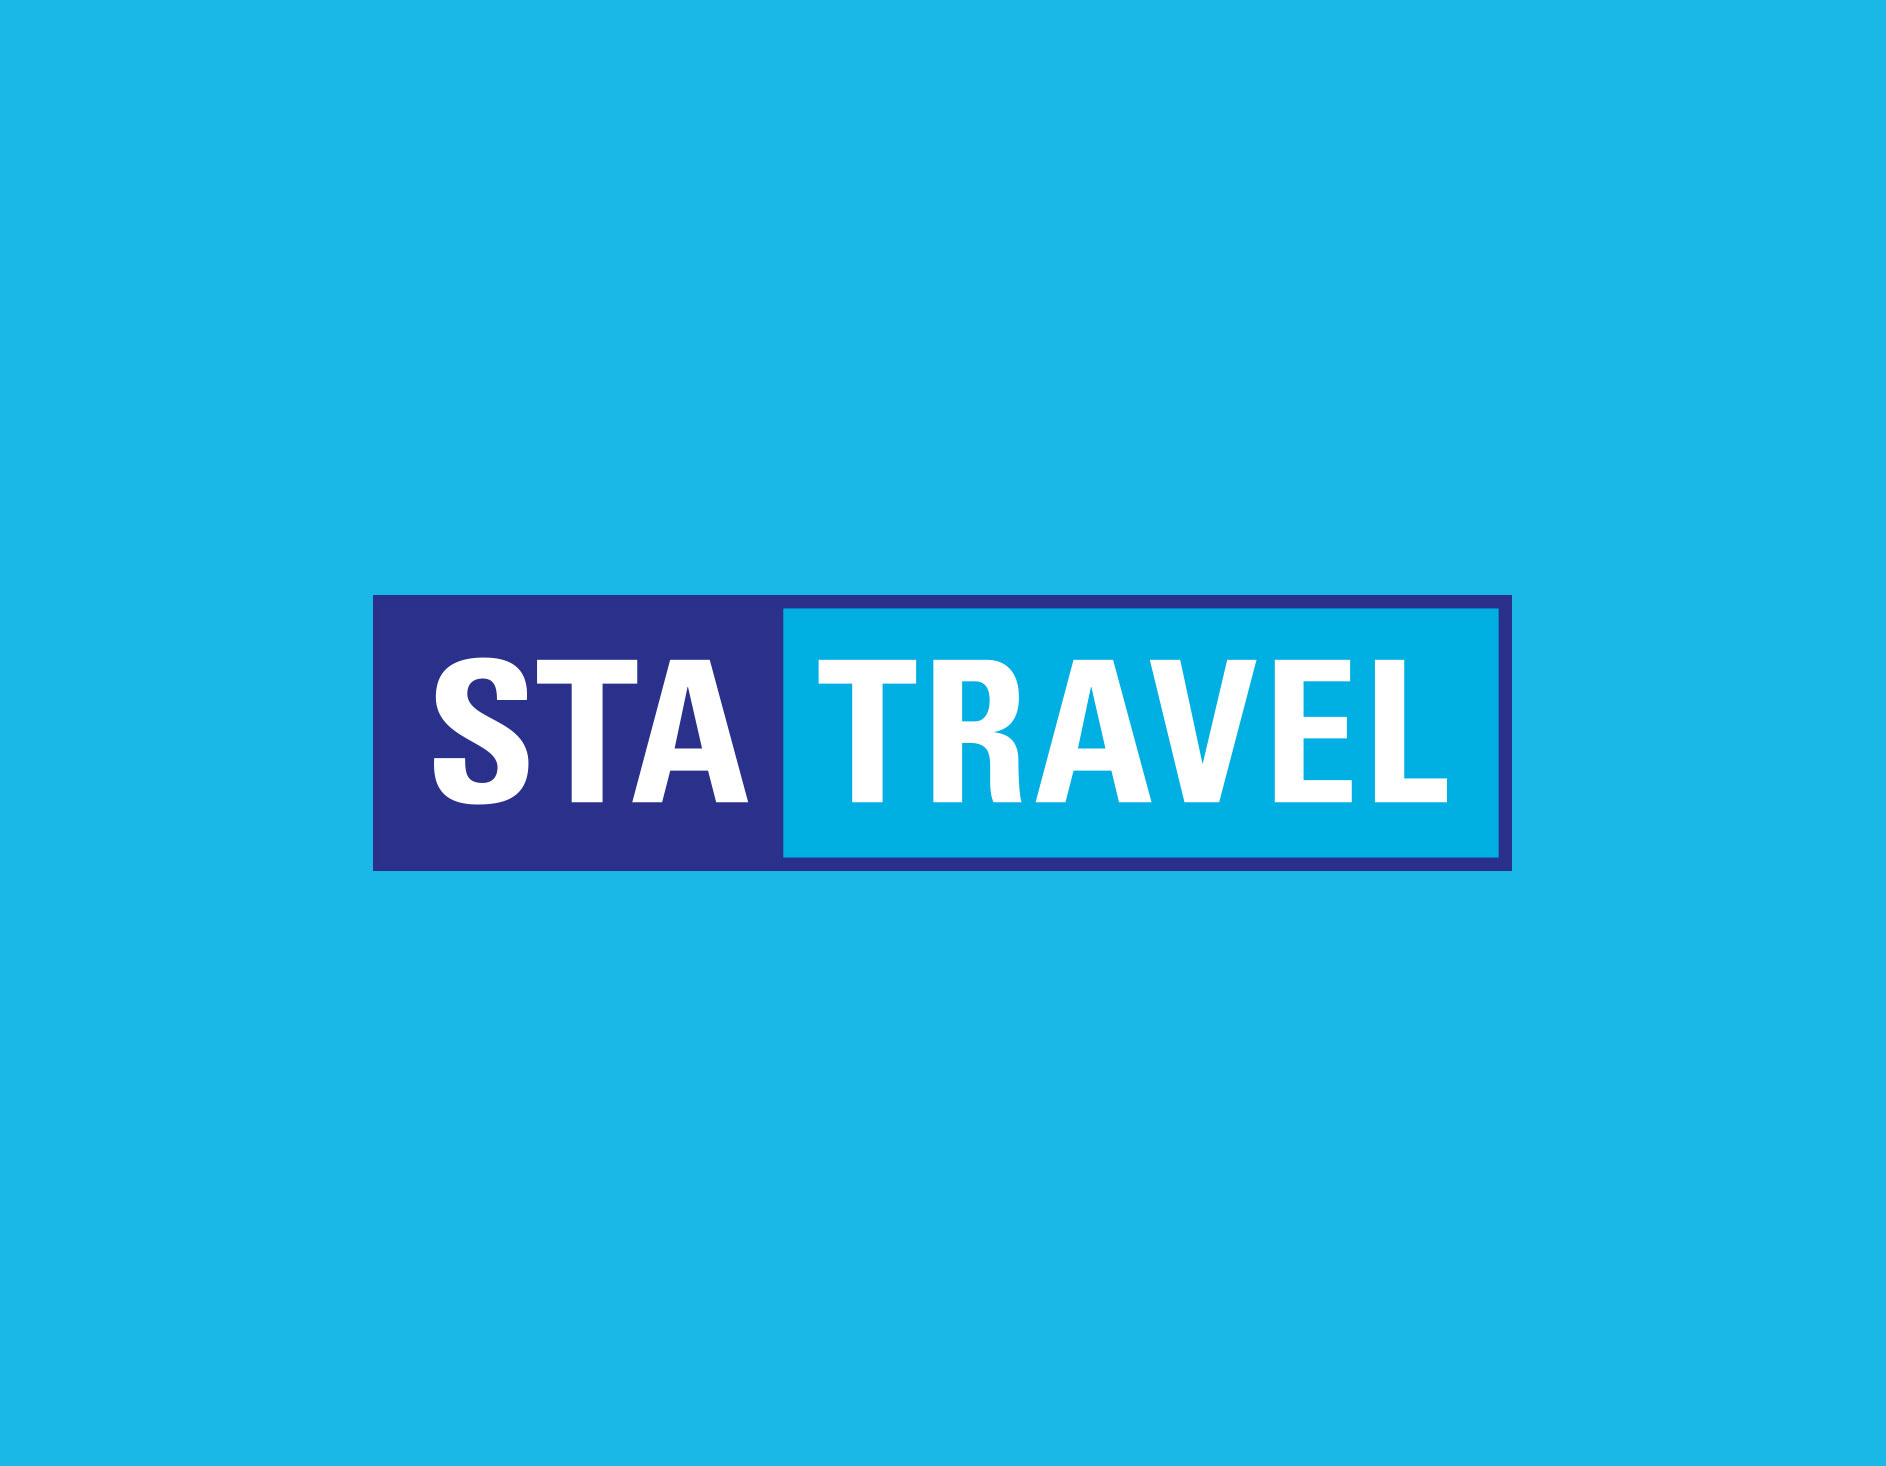 sta travel contact number